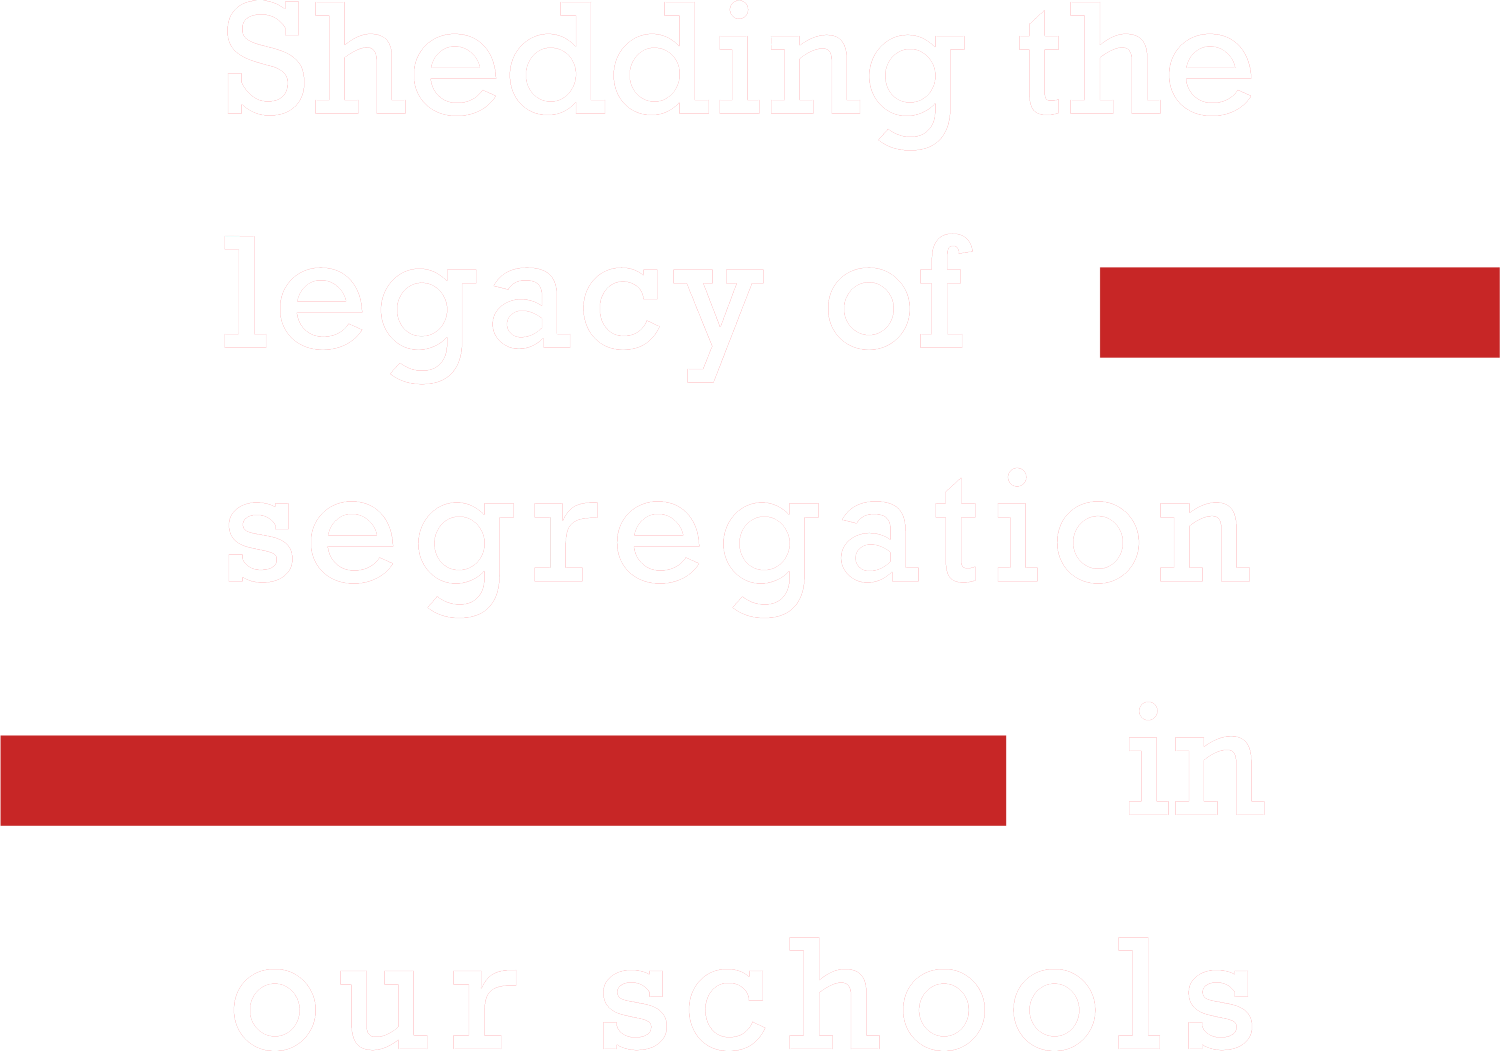 Shedding the legacy of segregation in our schools - article title